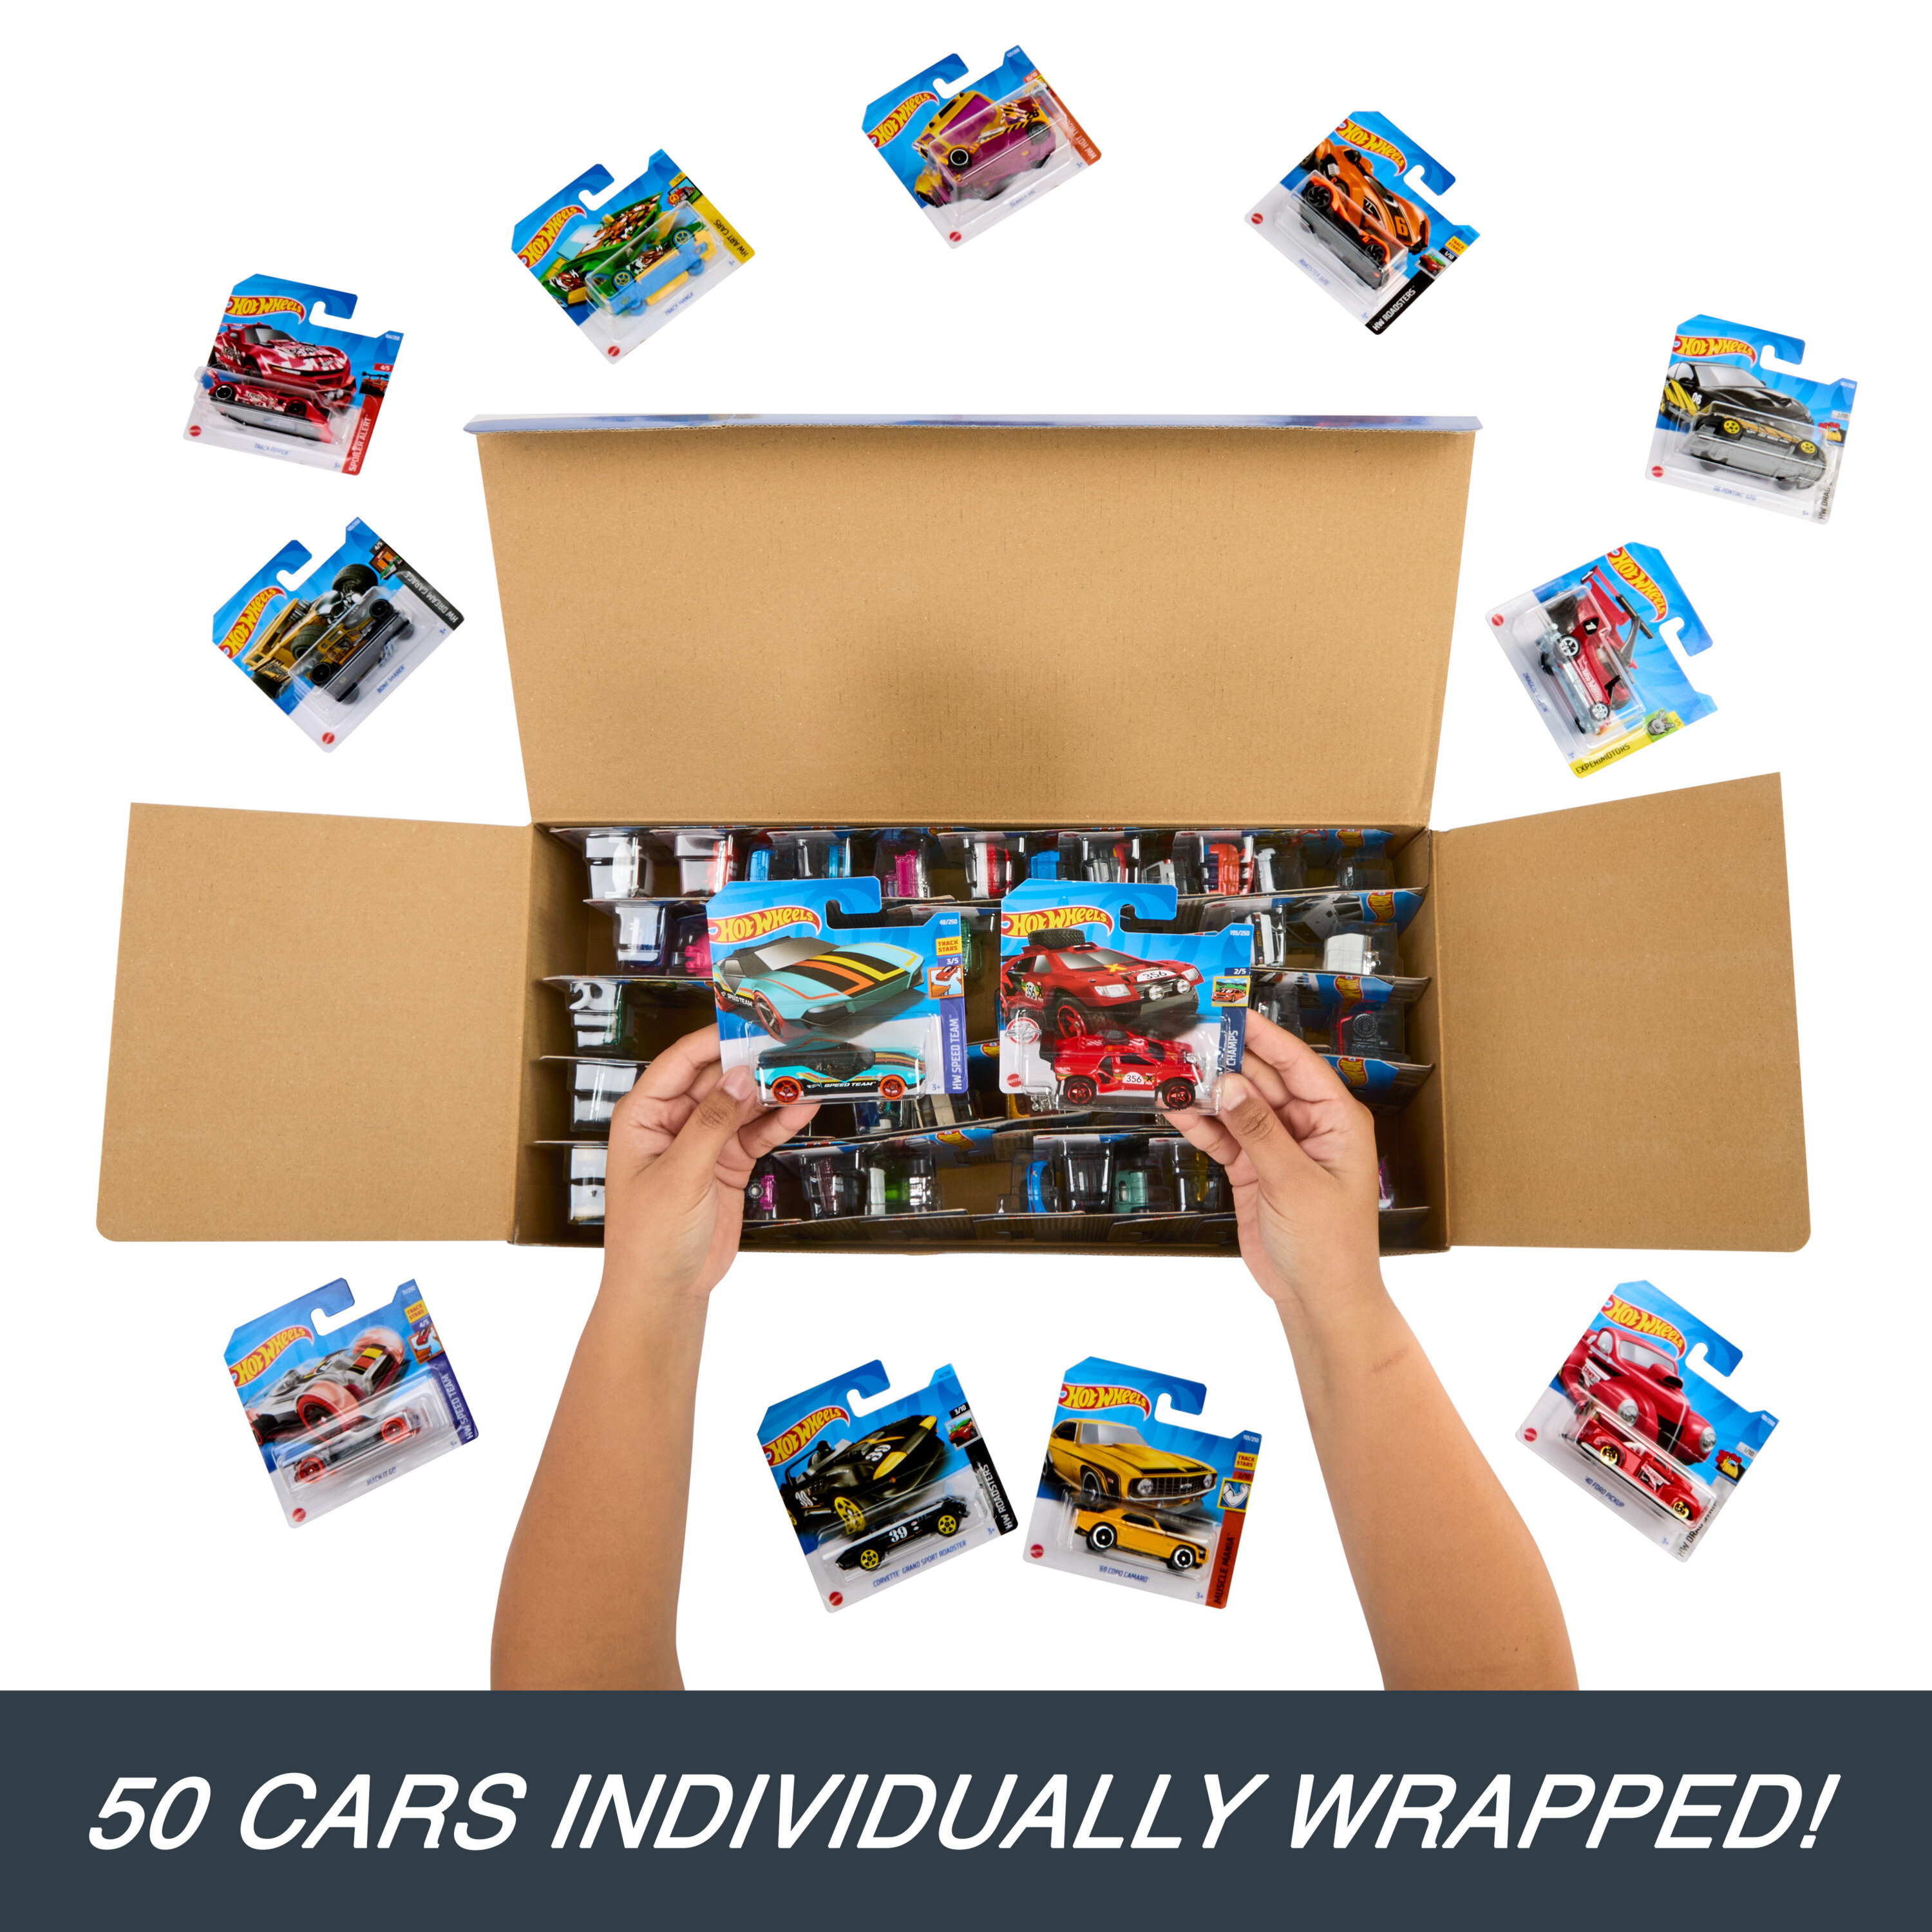 Hot Wheels Cars, Toy Trucks and Cars Individually Packaged, Set of 50 - image 4 of 7